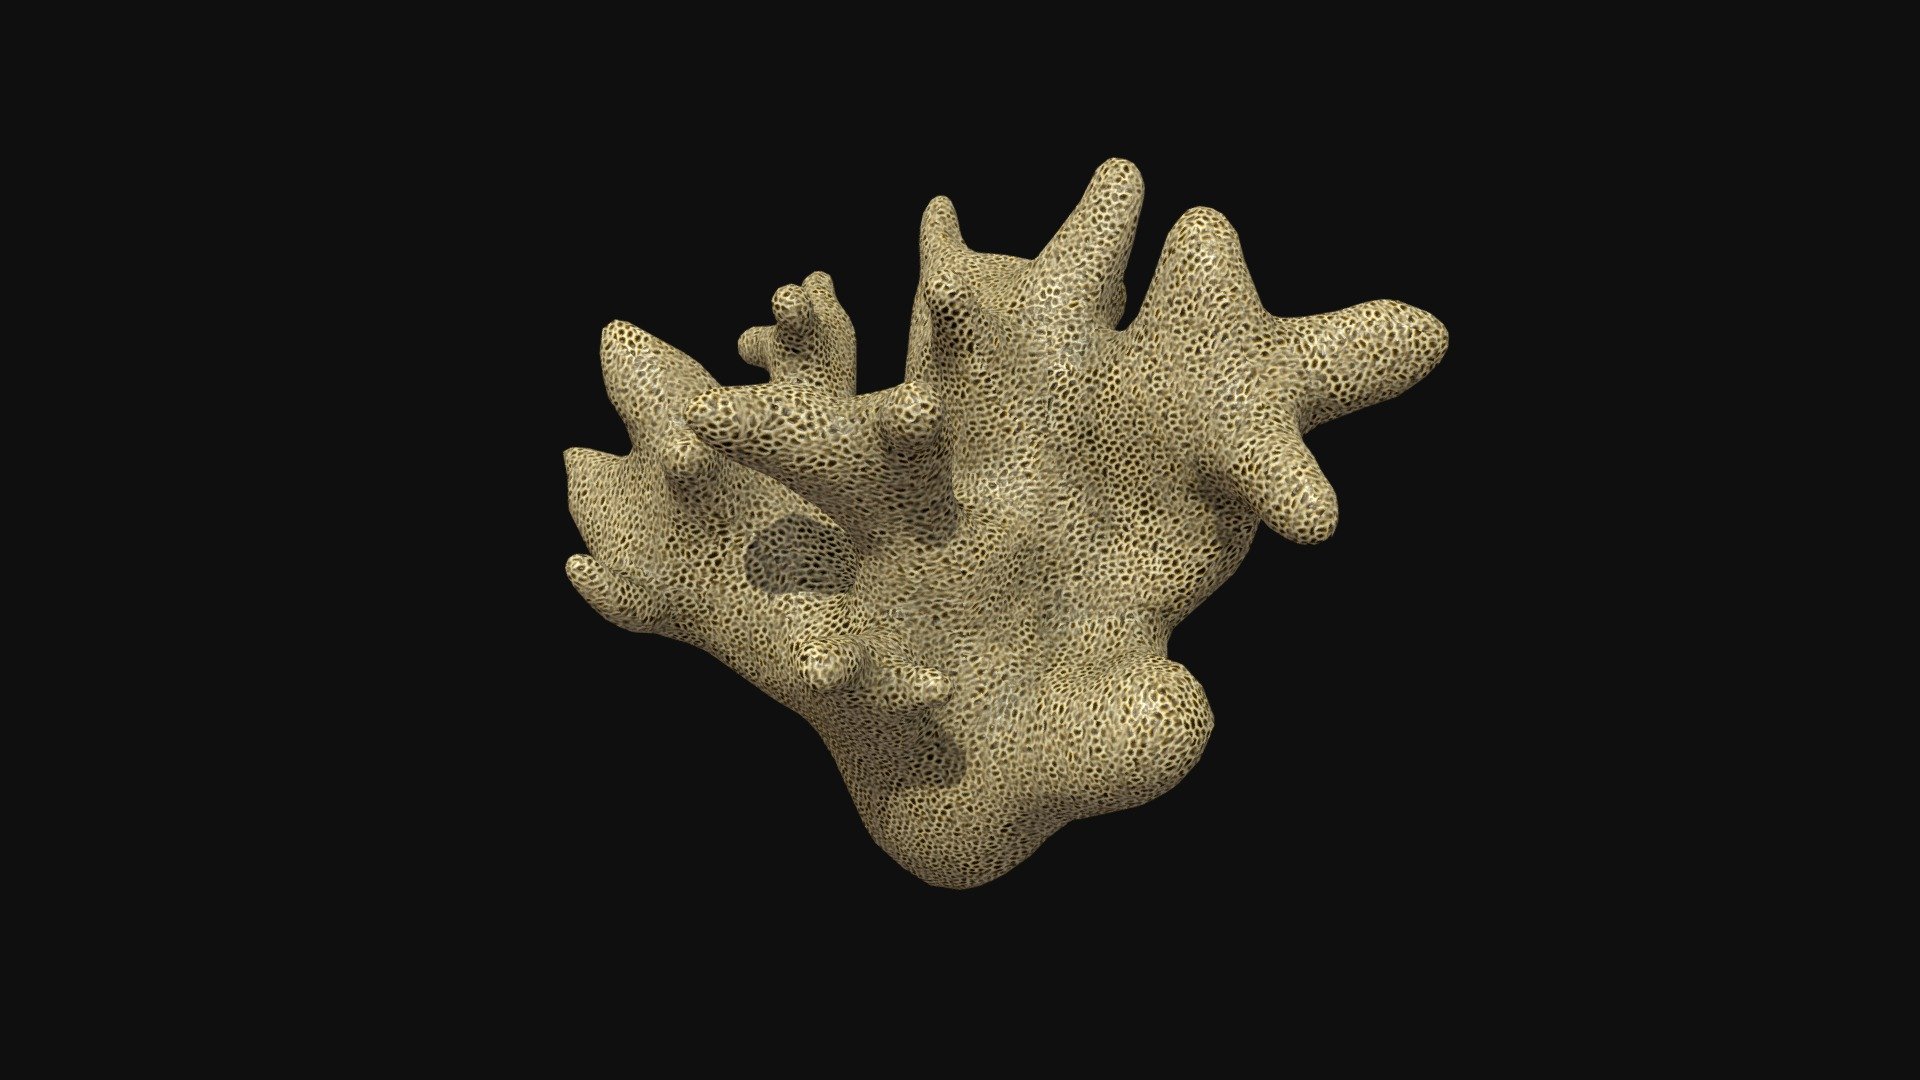 3D lowpoly model of a sea coral.

This model is part of a Coral pack 3d model